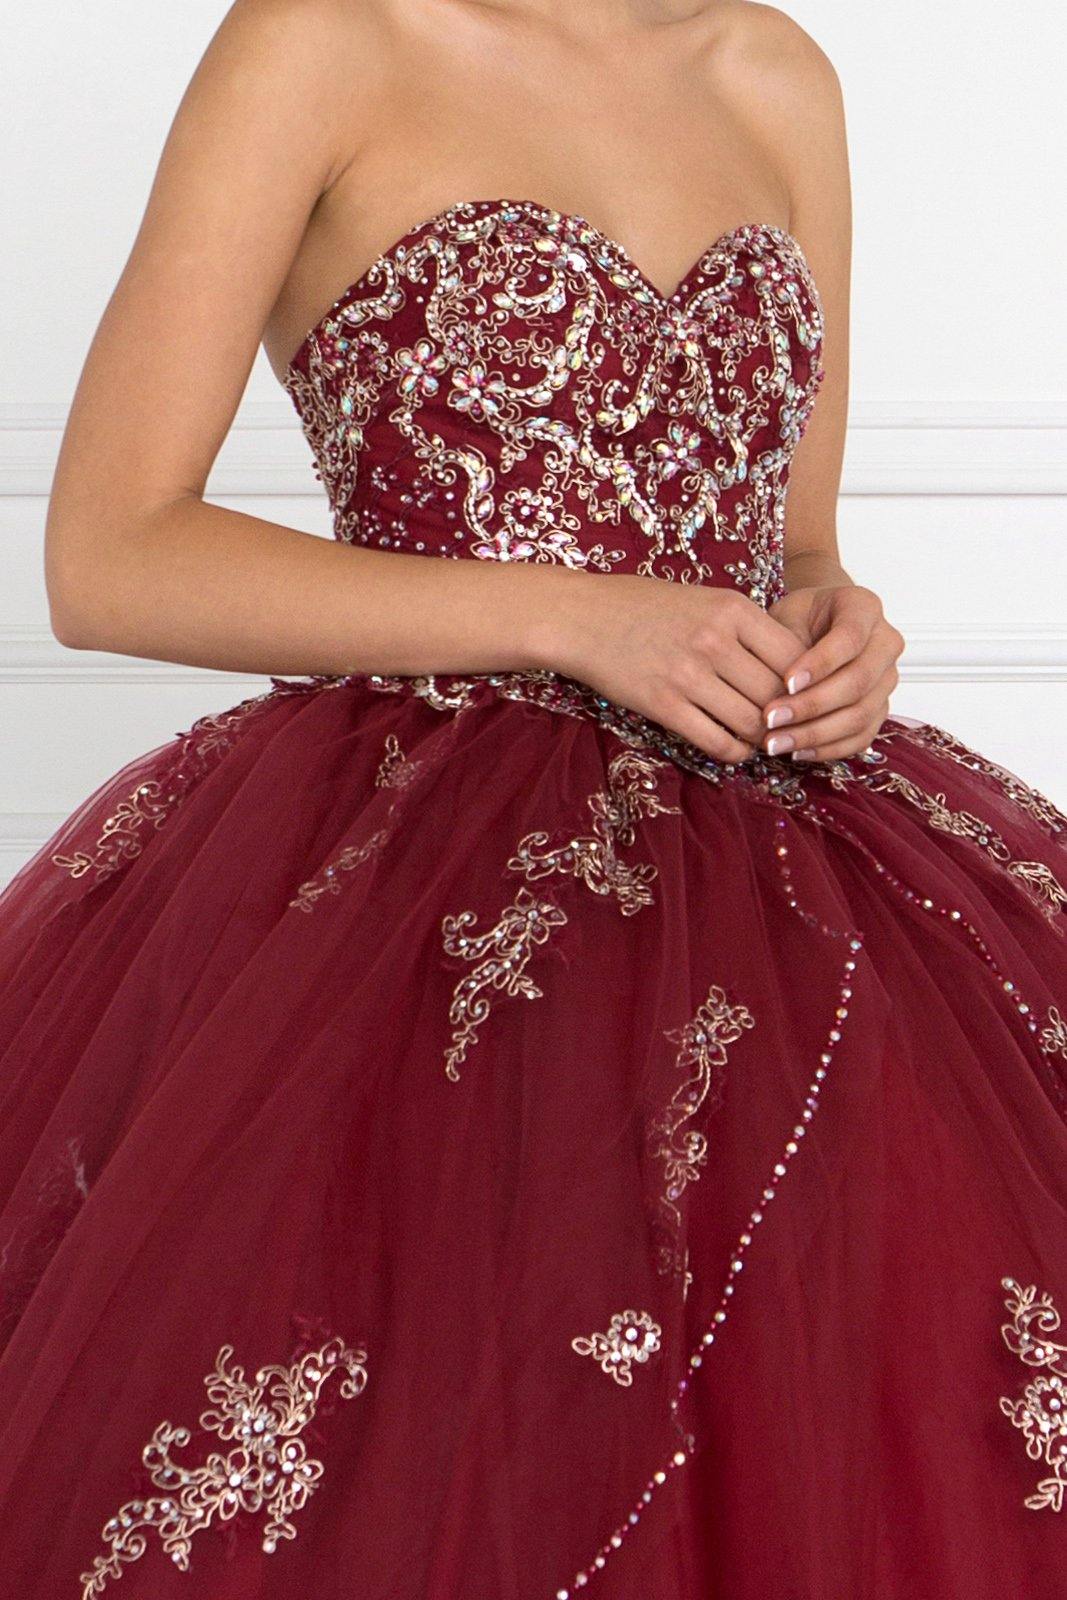 Quinceanera Embellished Tulle Quinceanera Dress with Bolero - The Dress Outlet Elizabeth K